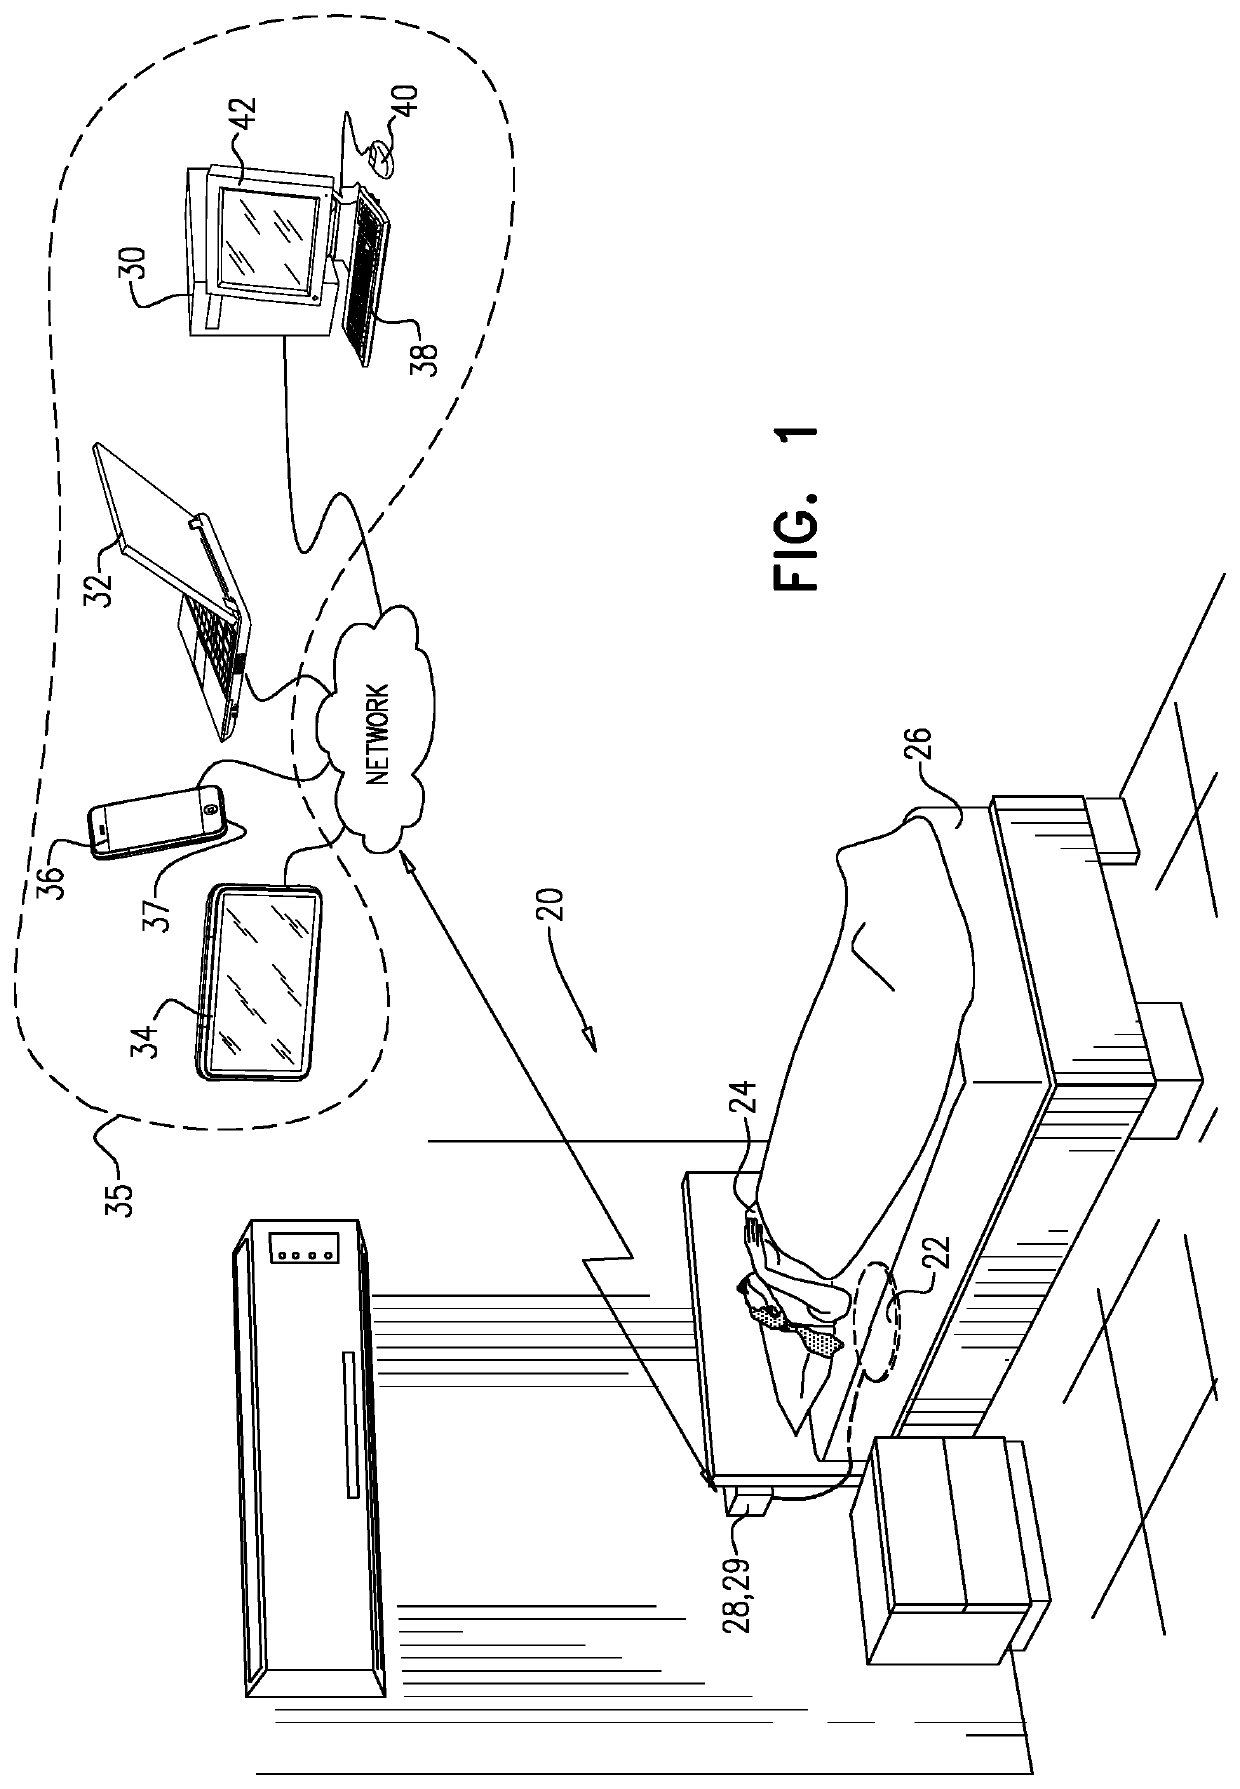 Apparatus for monitoring a subject